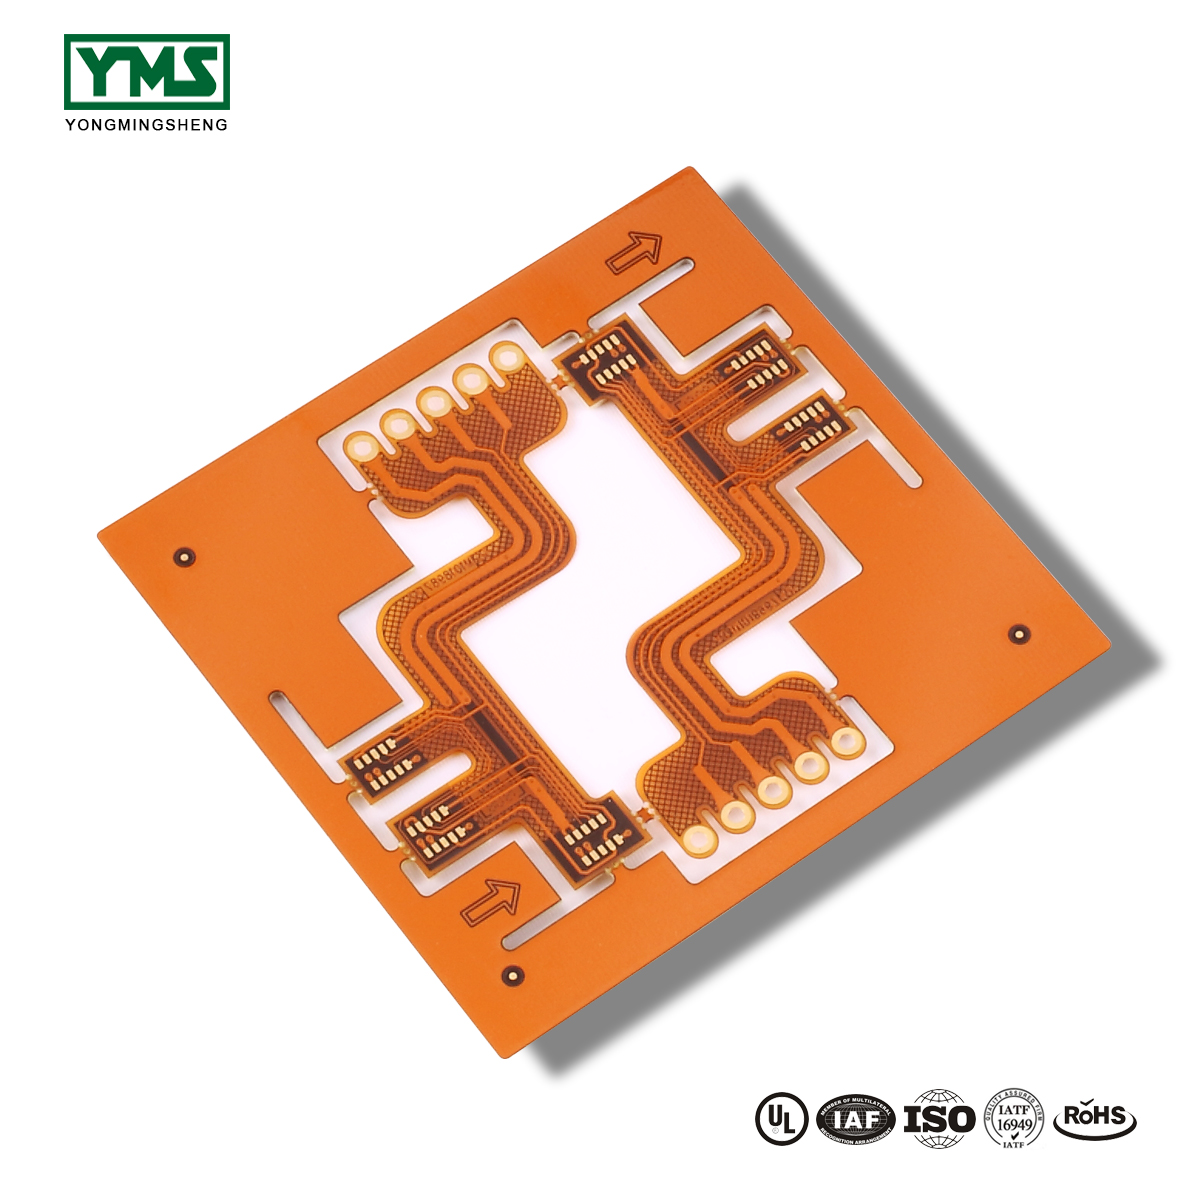 Discount wholesale Bare Pcb Fr4 Material - 4Layer Immersion Gold FPC | YMS PPCB – Yongmingsheng